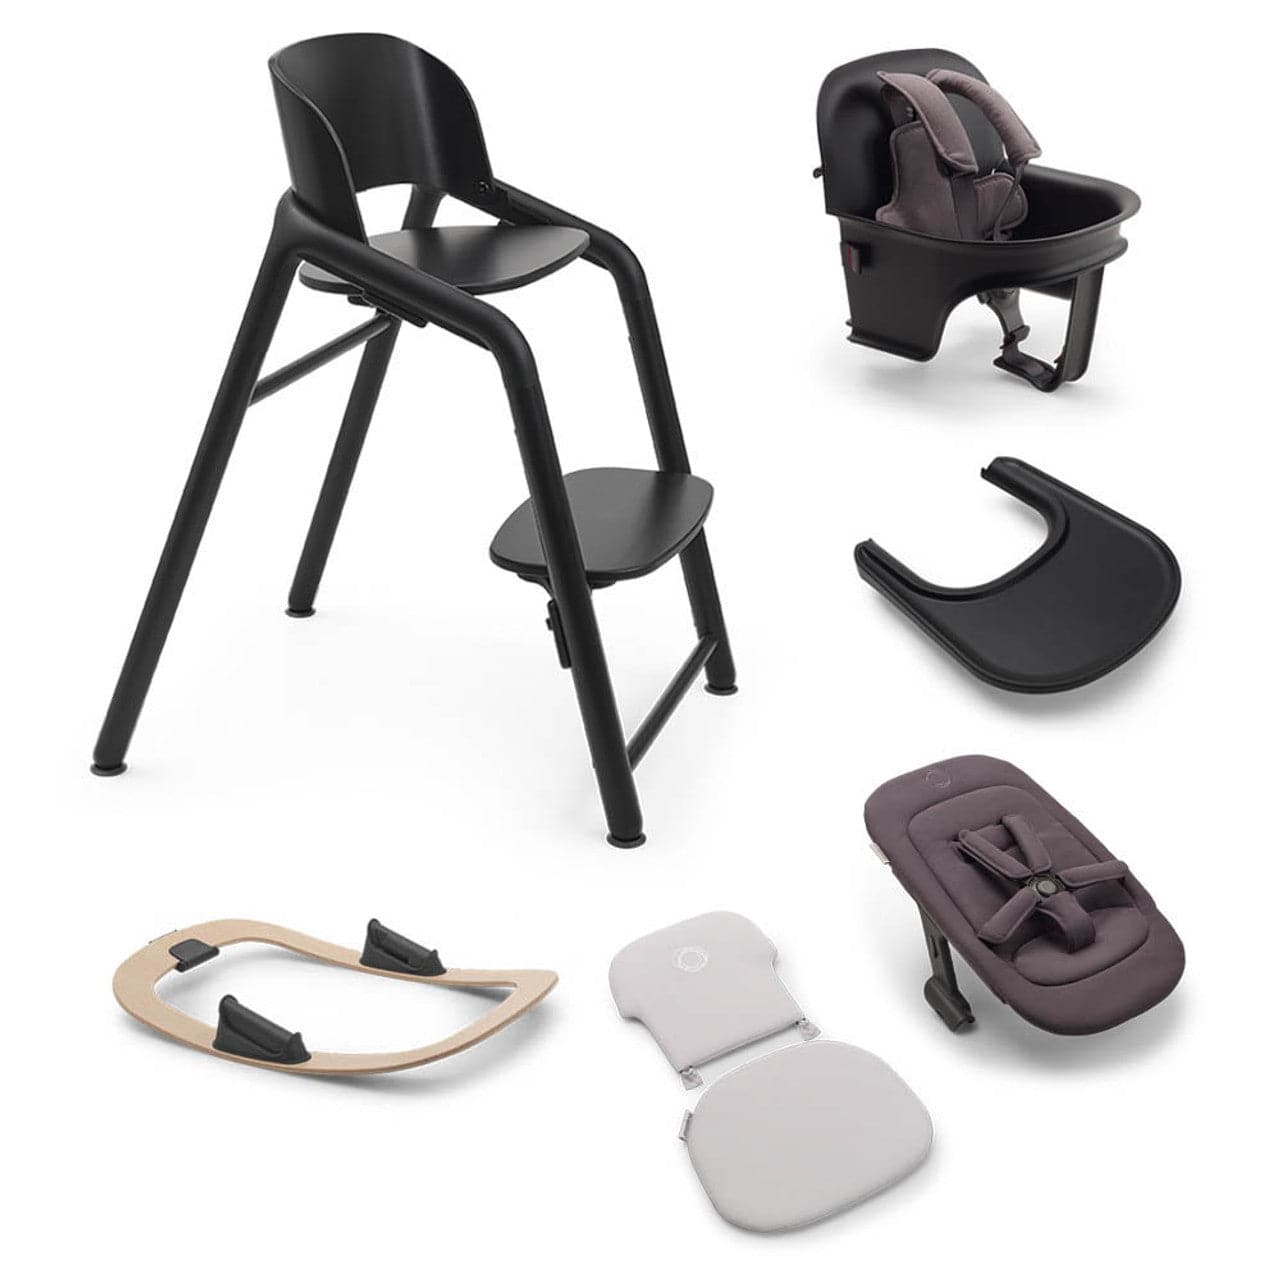 Bugaboo Giraffe Highchair Ultimate Bundle - Black - For Your Little One